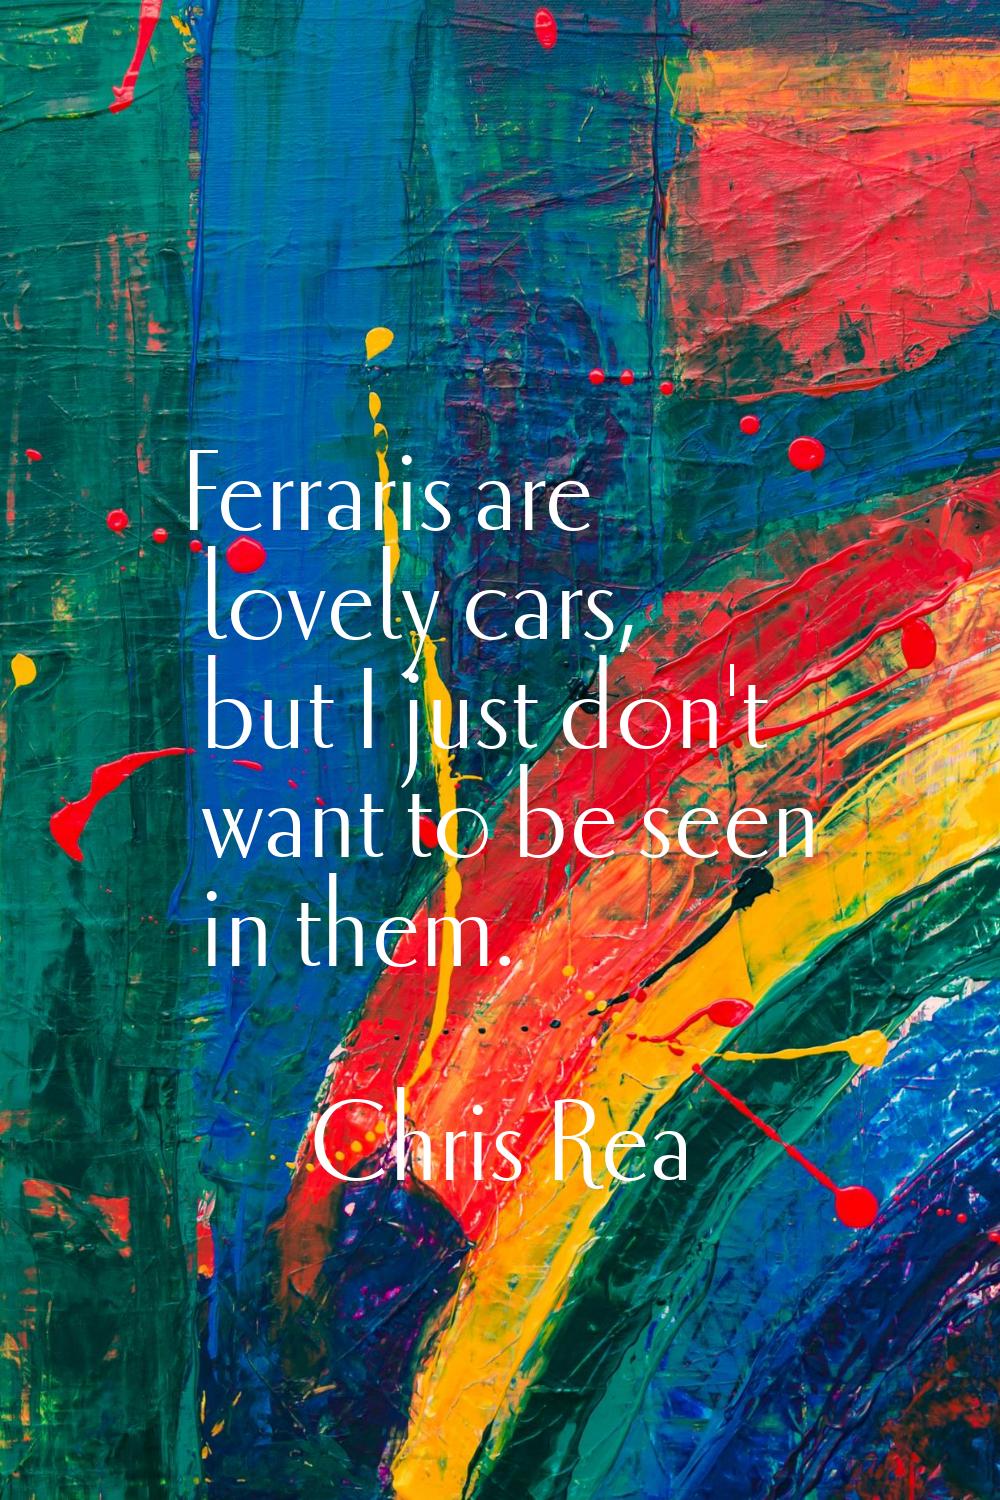 Ferraris are lovely cars, but I just don't want to be seen in them.